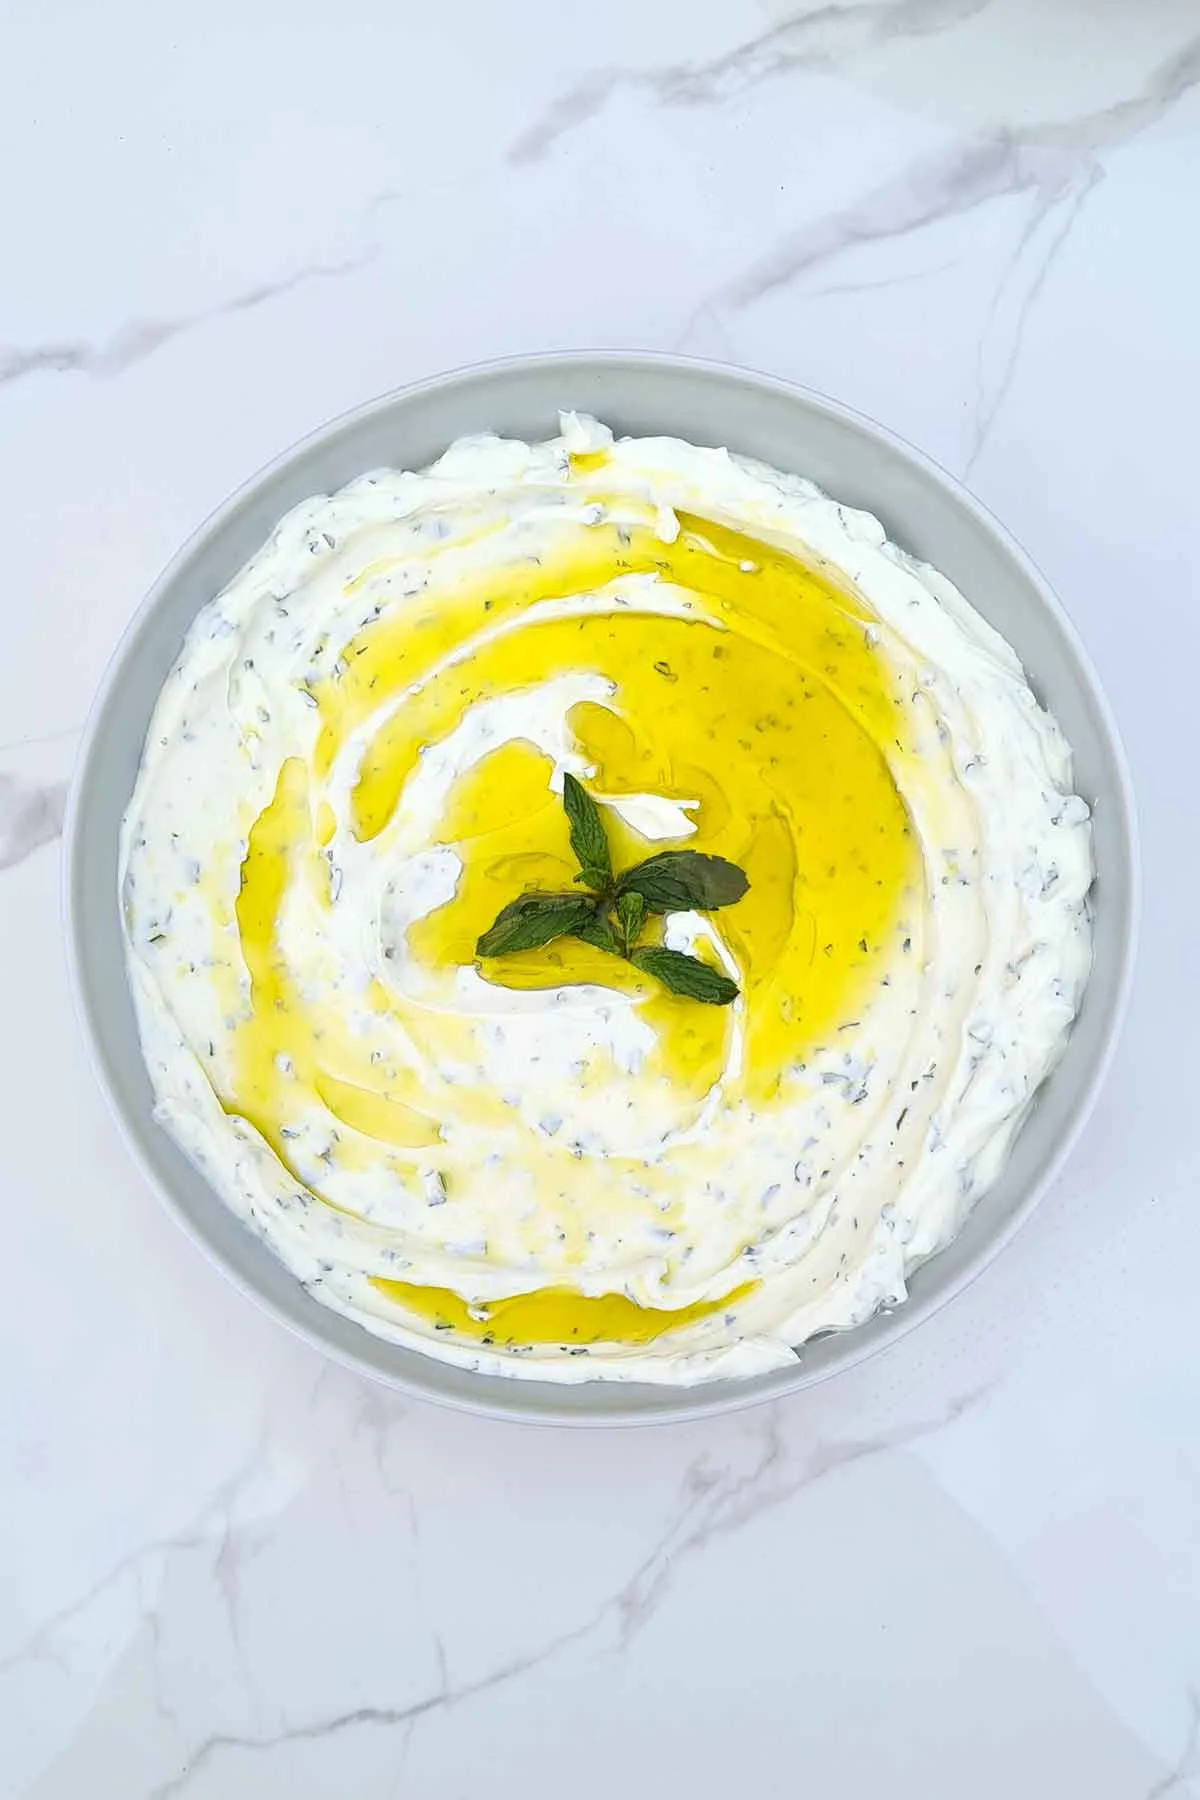 How to make labneh at home recipe